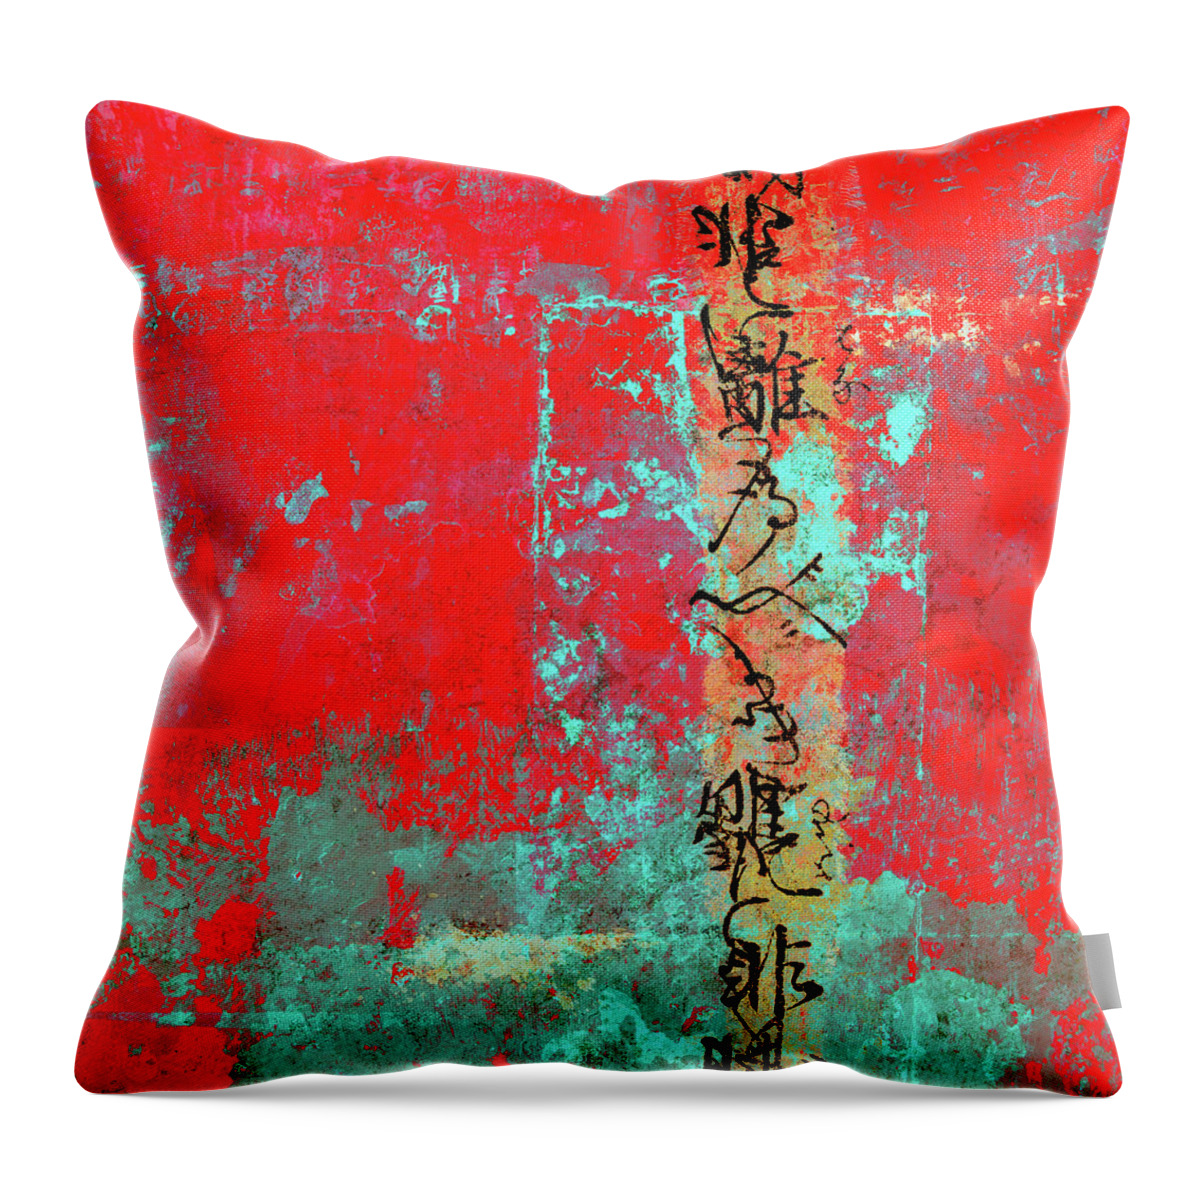 Red Throw Pillow featuring the mixed media Scraped Wall Texture Red and Turquoise by Carol Leigh